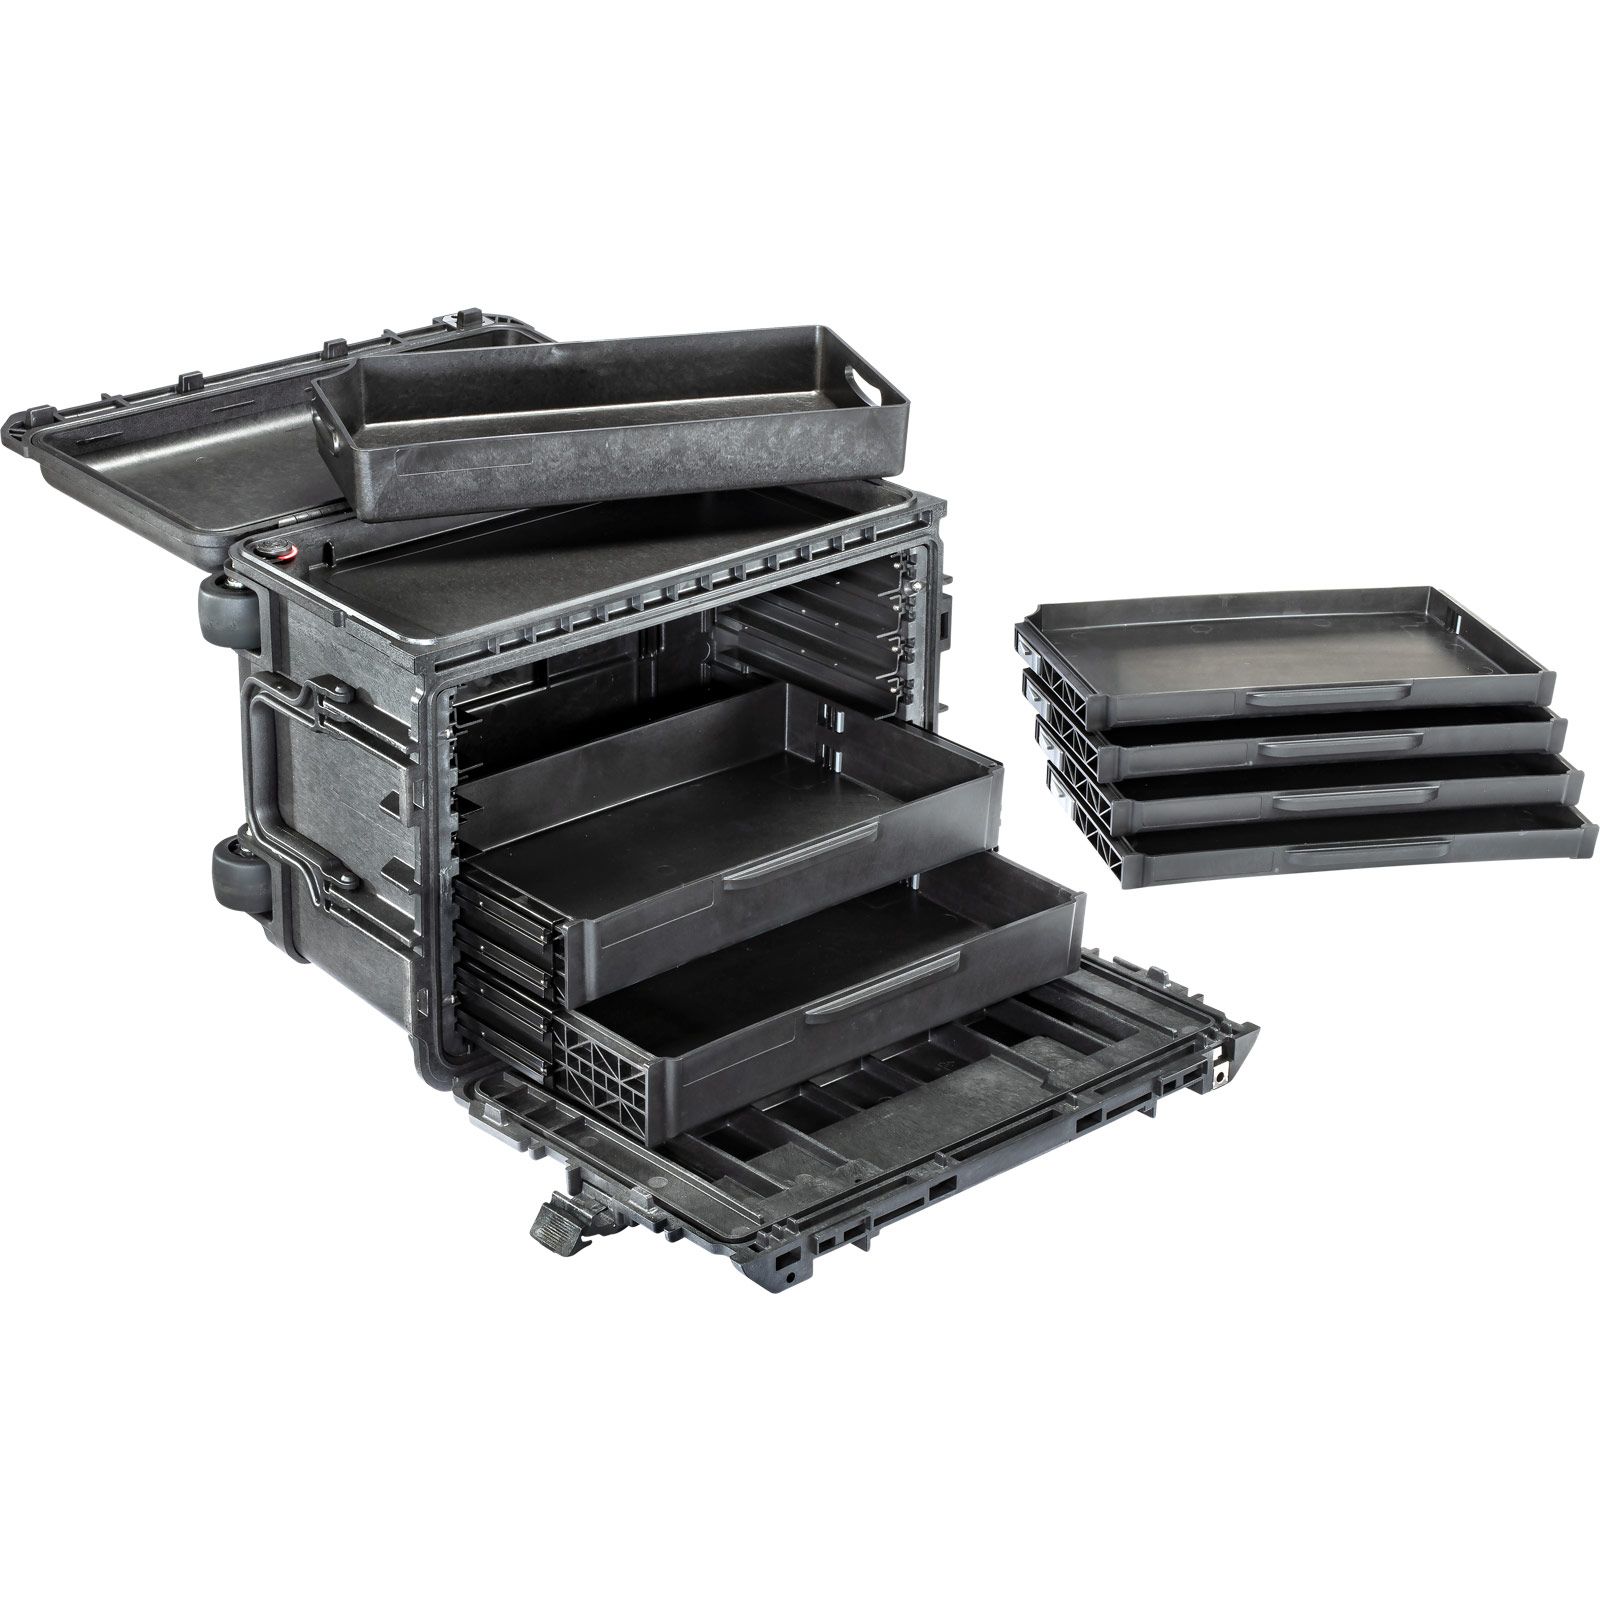 PELI™ PROTECTOR CASE™ 0450-015-110E 0450WD Case with drawers without foam (Black) (1 deep)